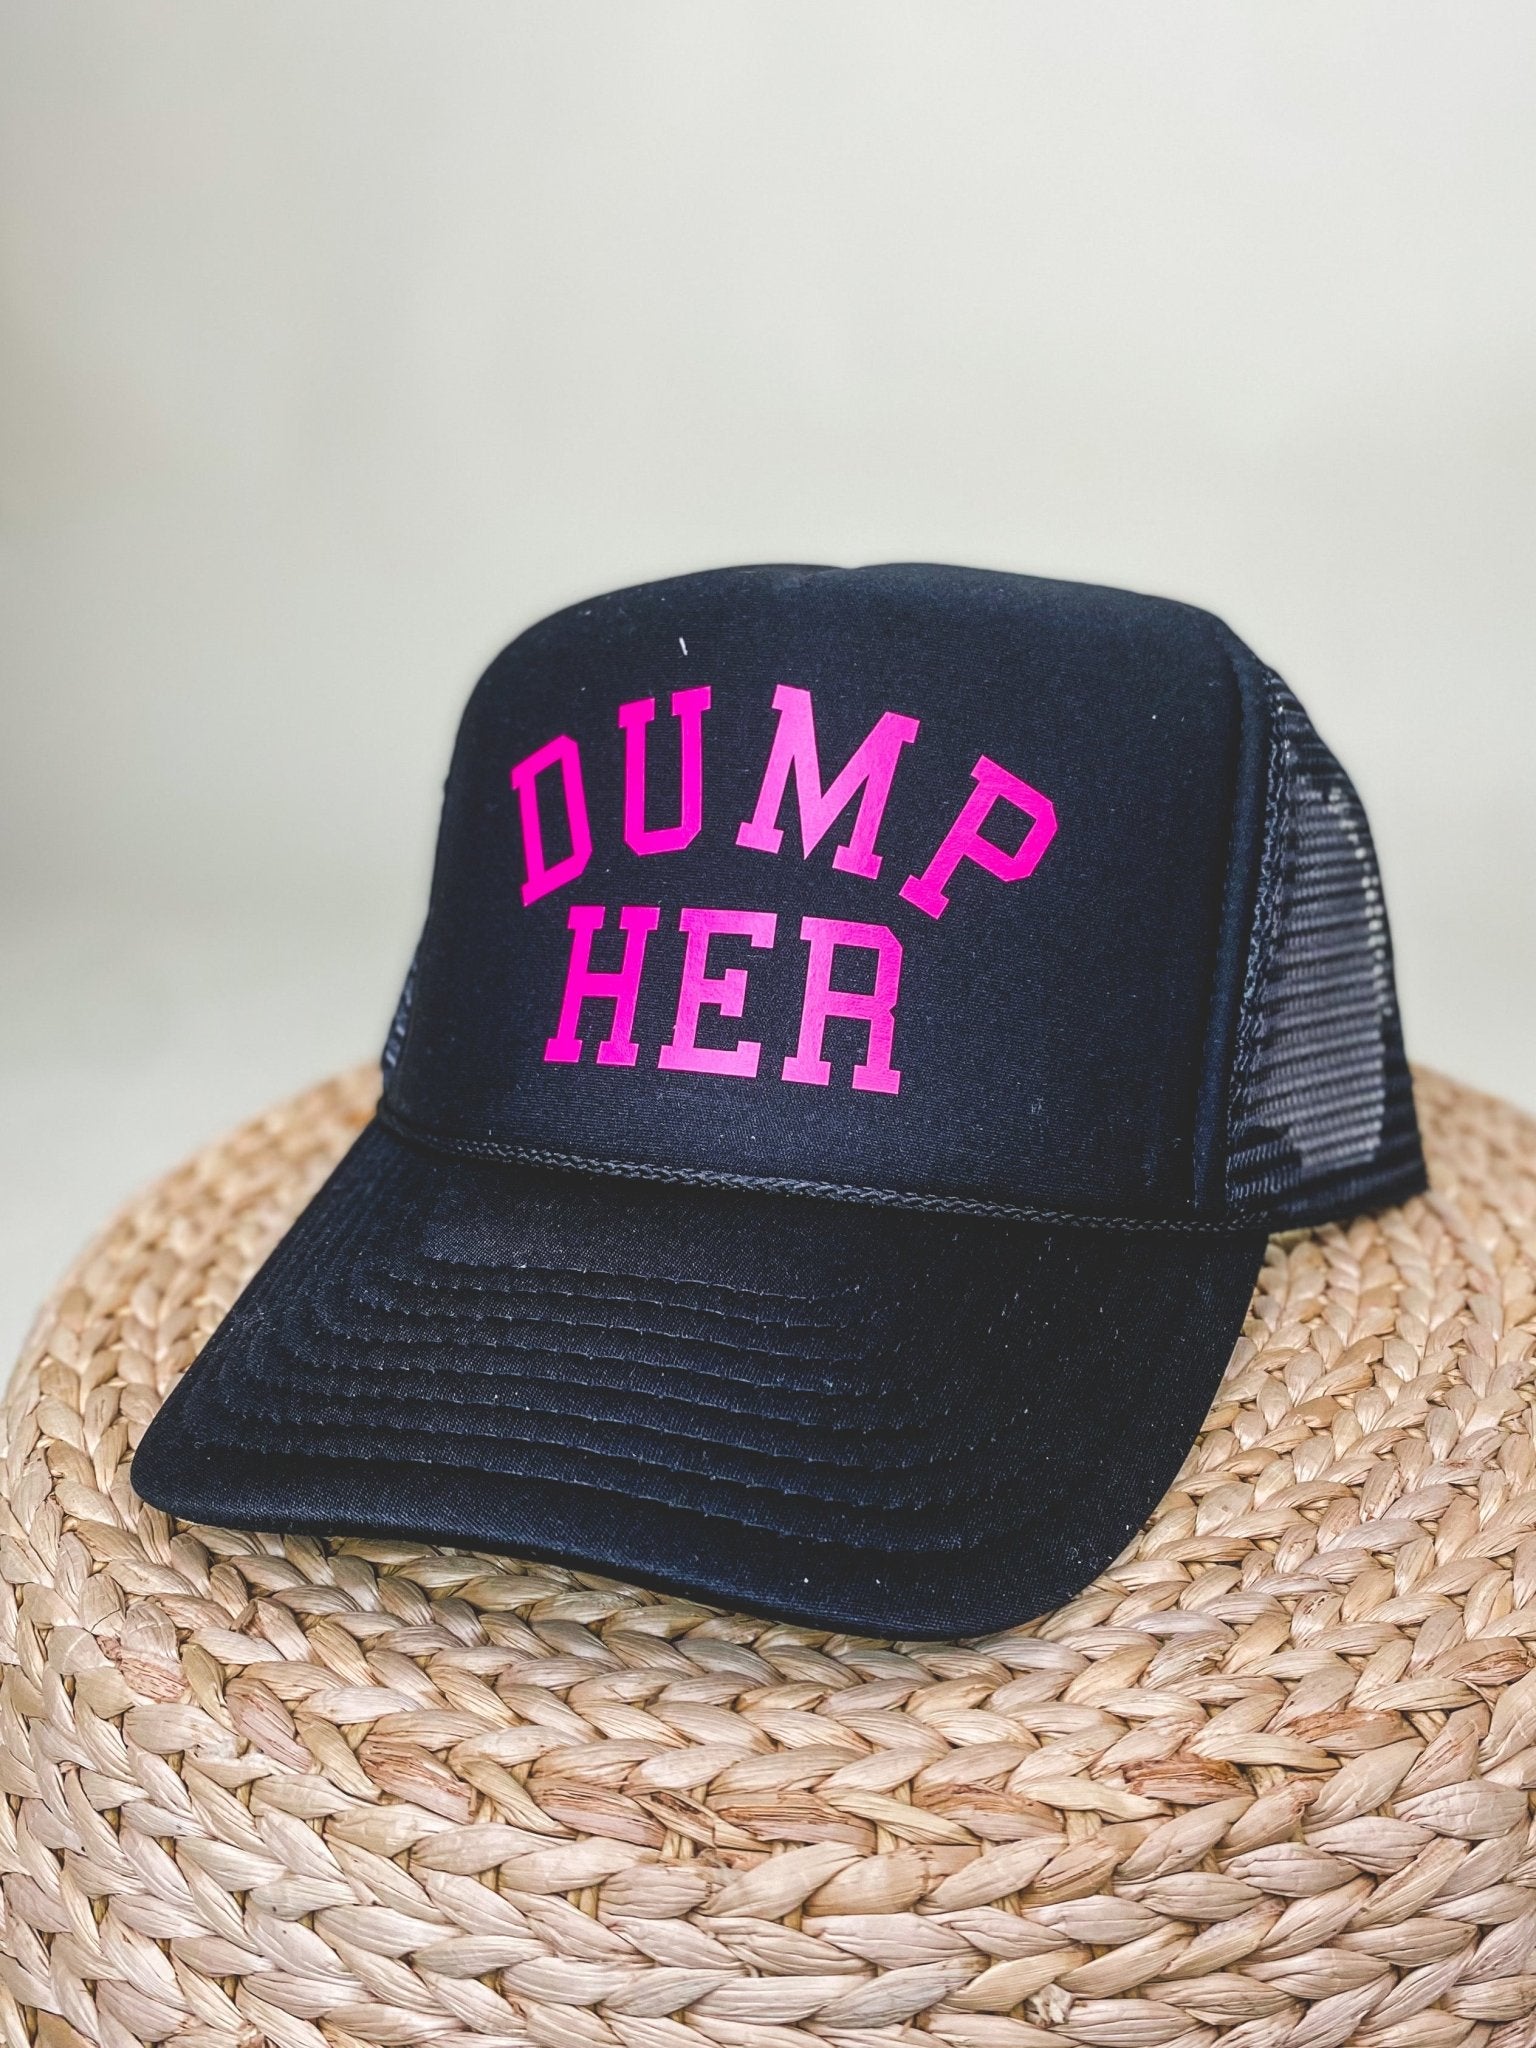 Dump her trucker hat black/pink - Trendy T-Shirts for Valentine's Day at Lush Fashion Lounge Boutique in Oklahoma City